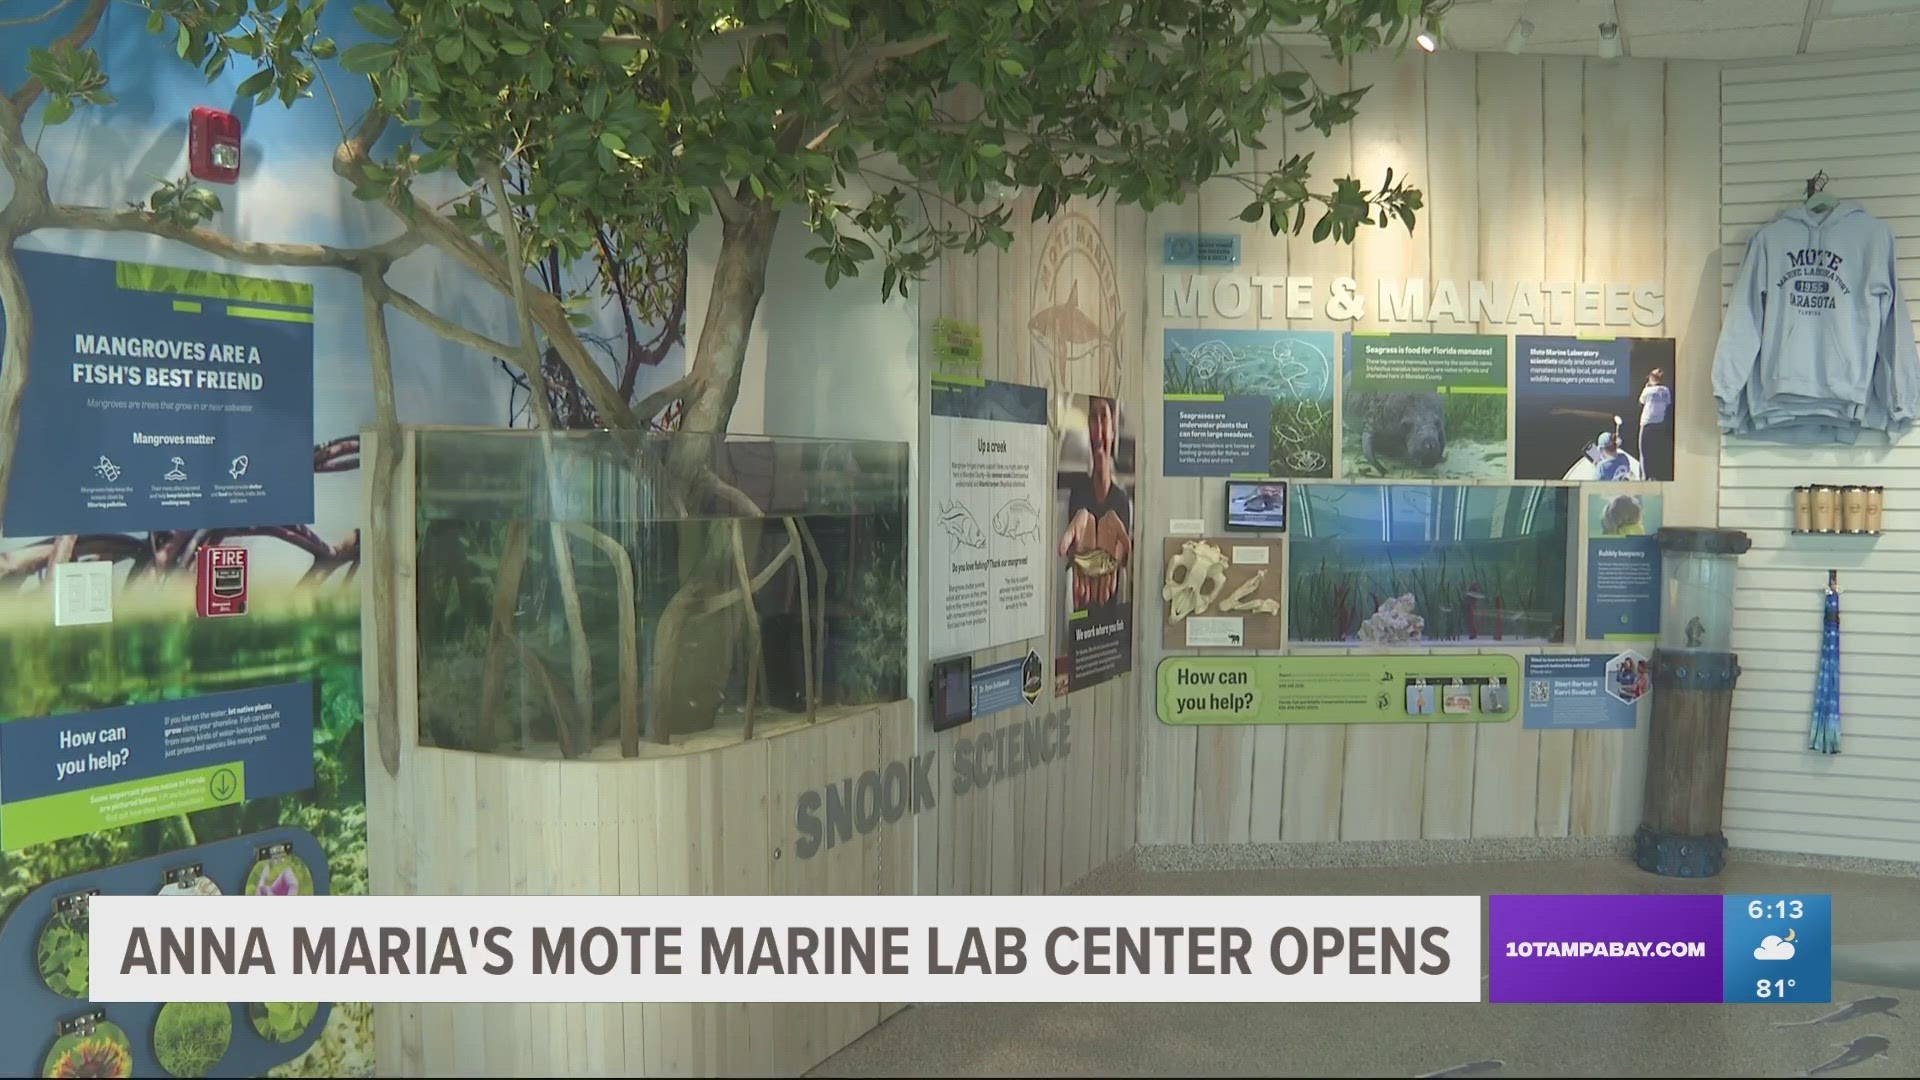 The 1,900-square-foot space on the city pier is a fun, interactive and creative center where people of all ages can learn about and connect with the environment.